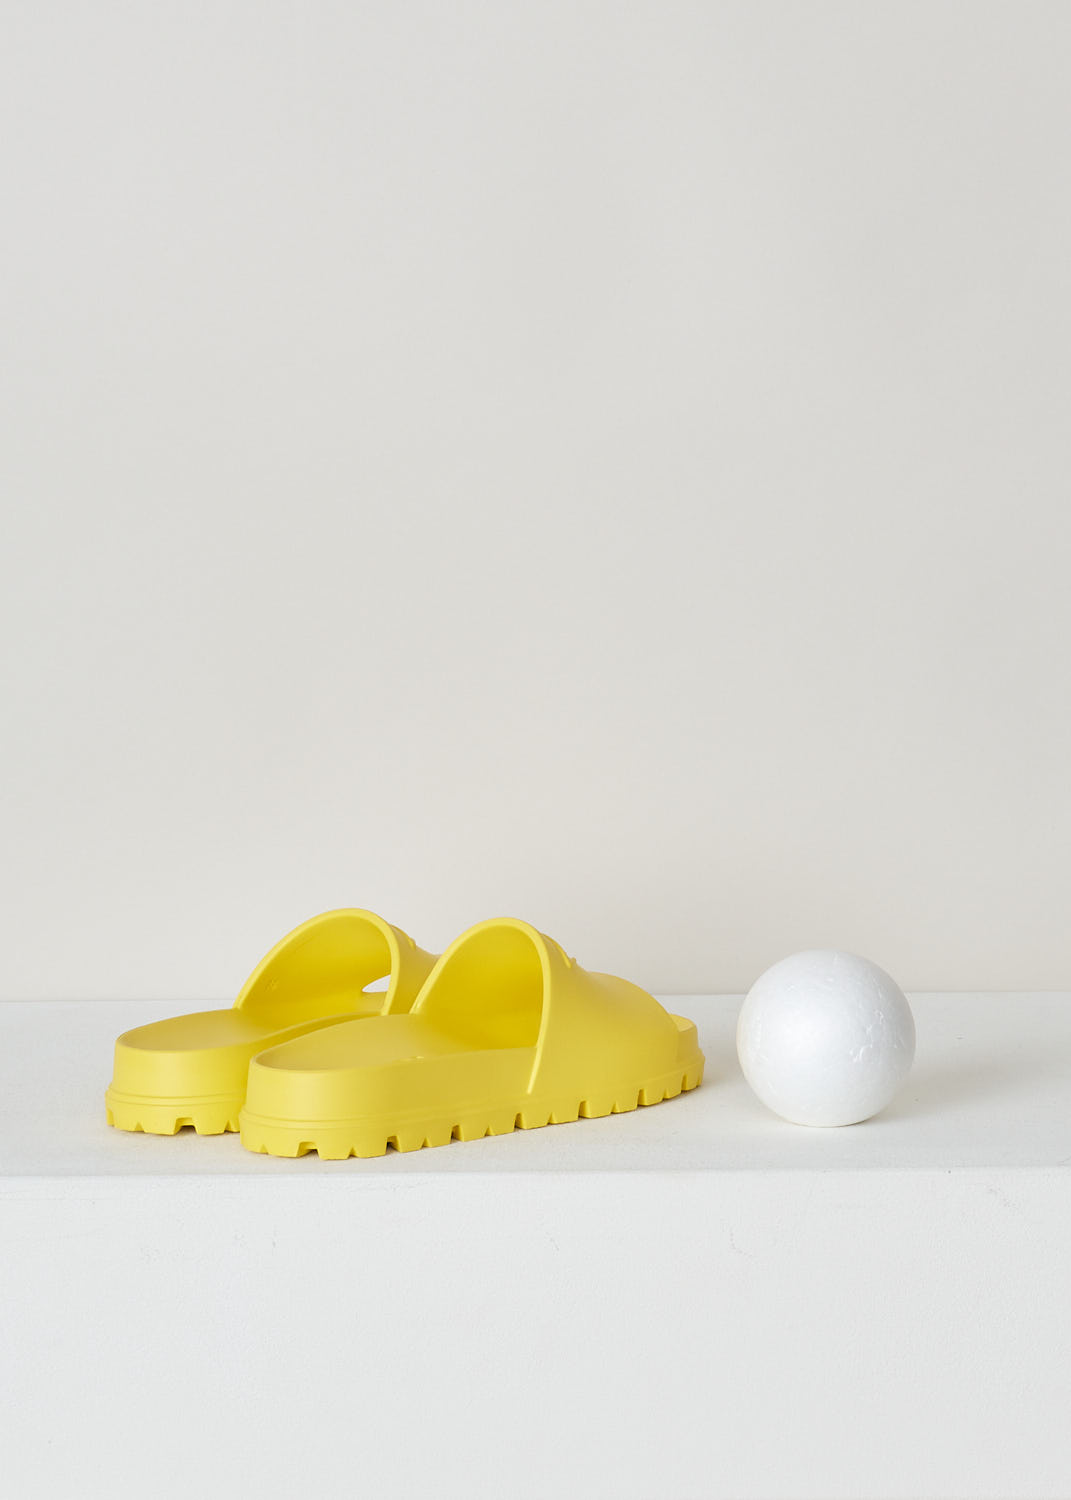 PRADA, YELLOW SLIDES, 1XX626_3LKV_F0377_3_99_F_020_CALZATURE_DONNA_SOLE, Yellow, Back, These yellow slip-on style slides have a round open toe with an embossed logo on the front. These slides have ridged soles. 